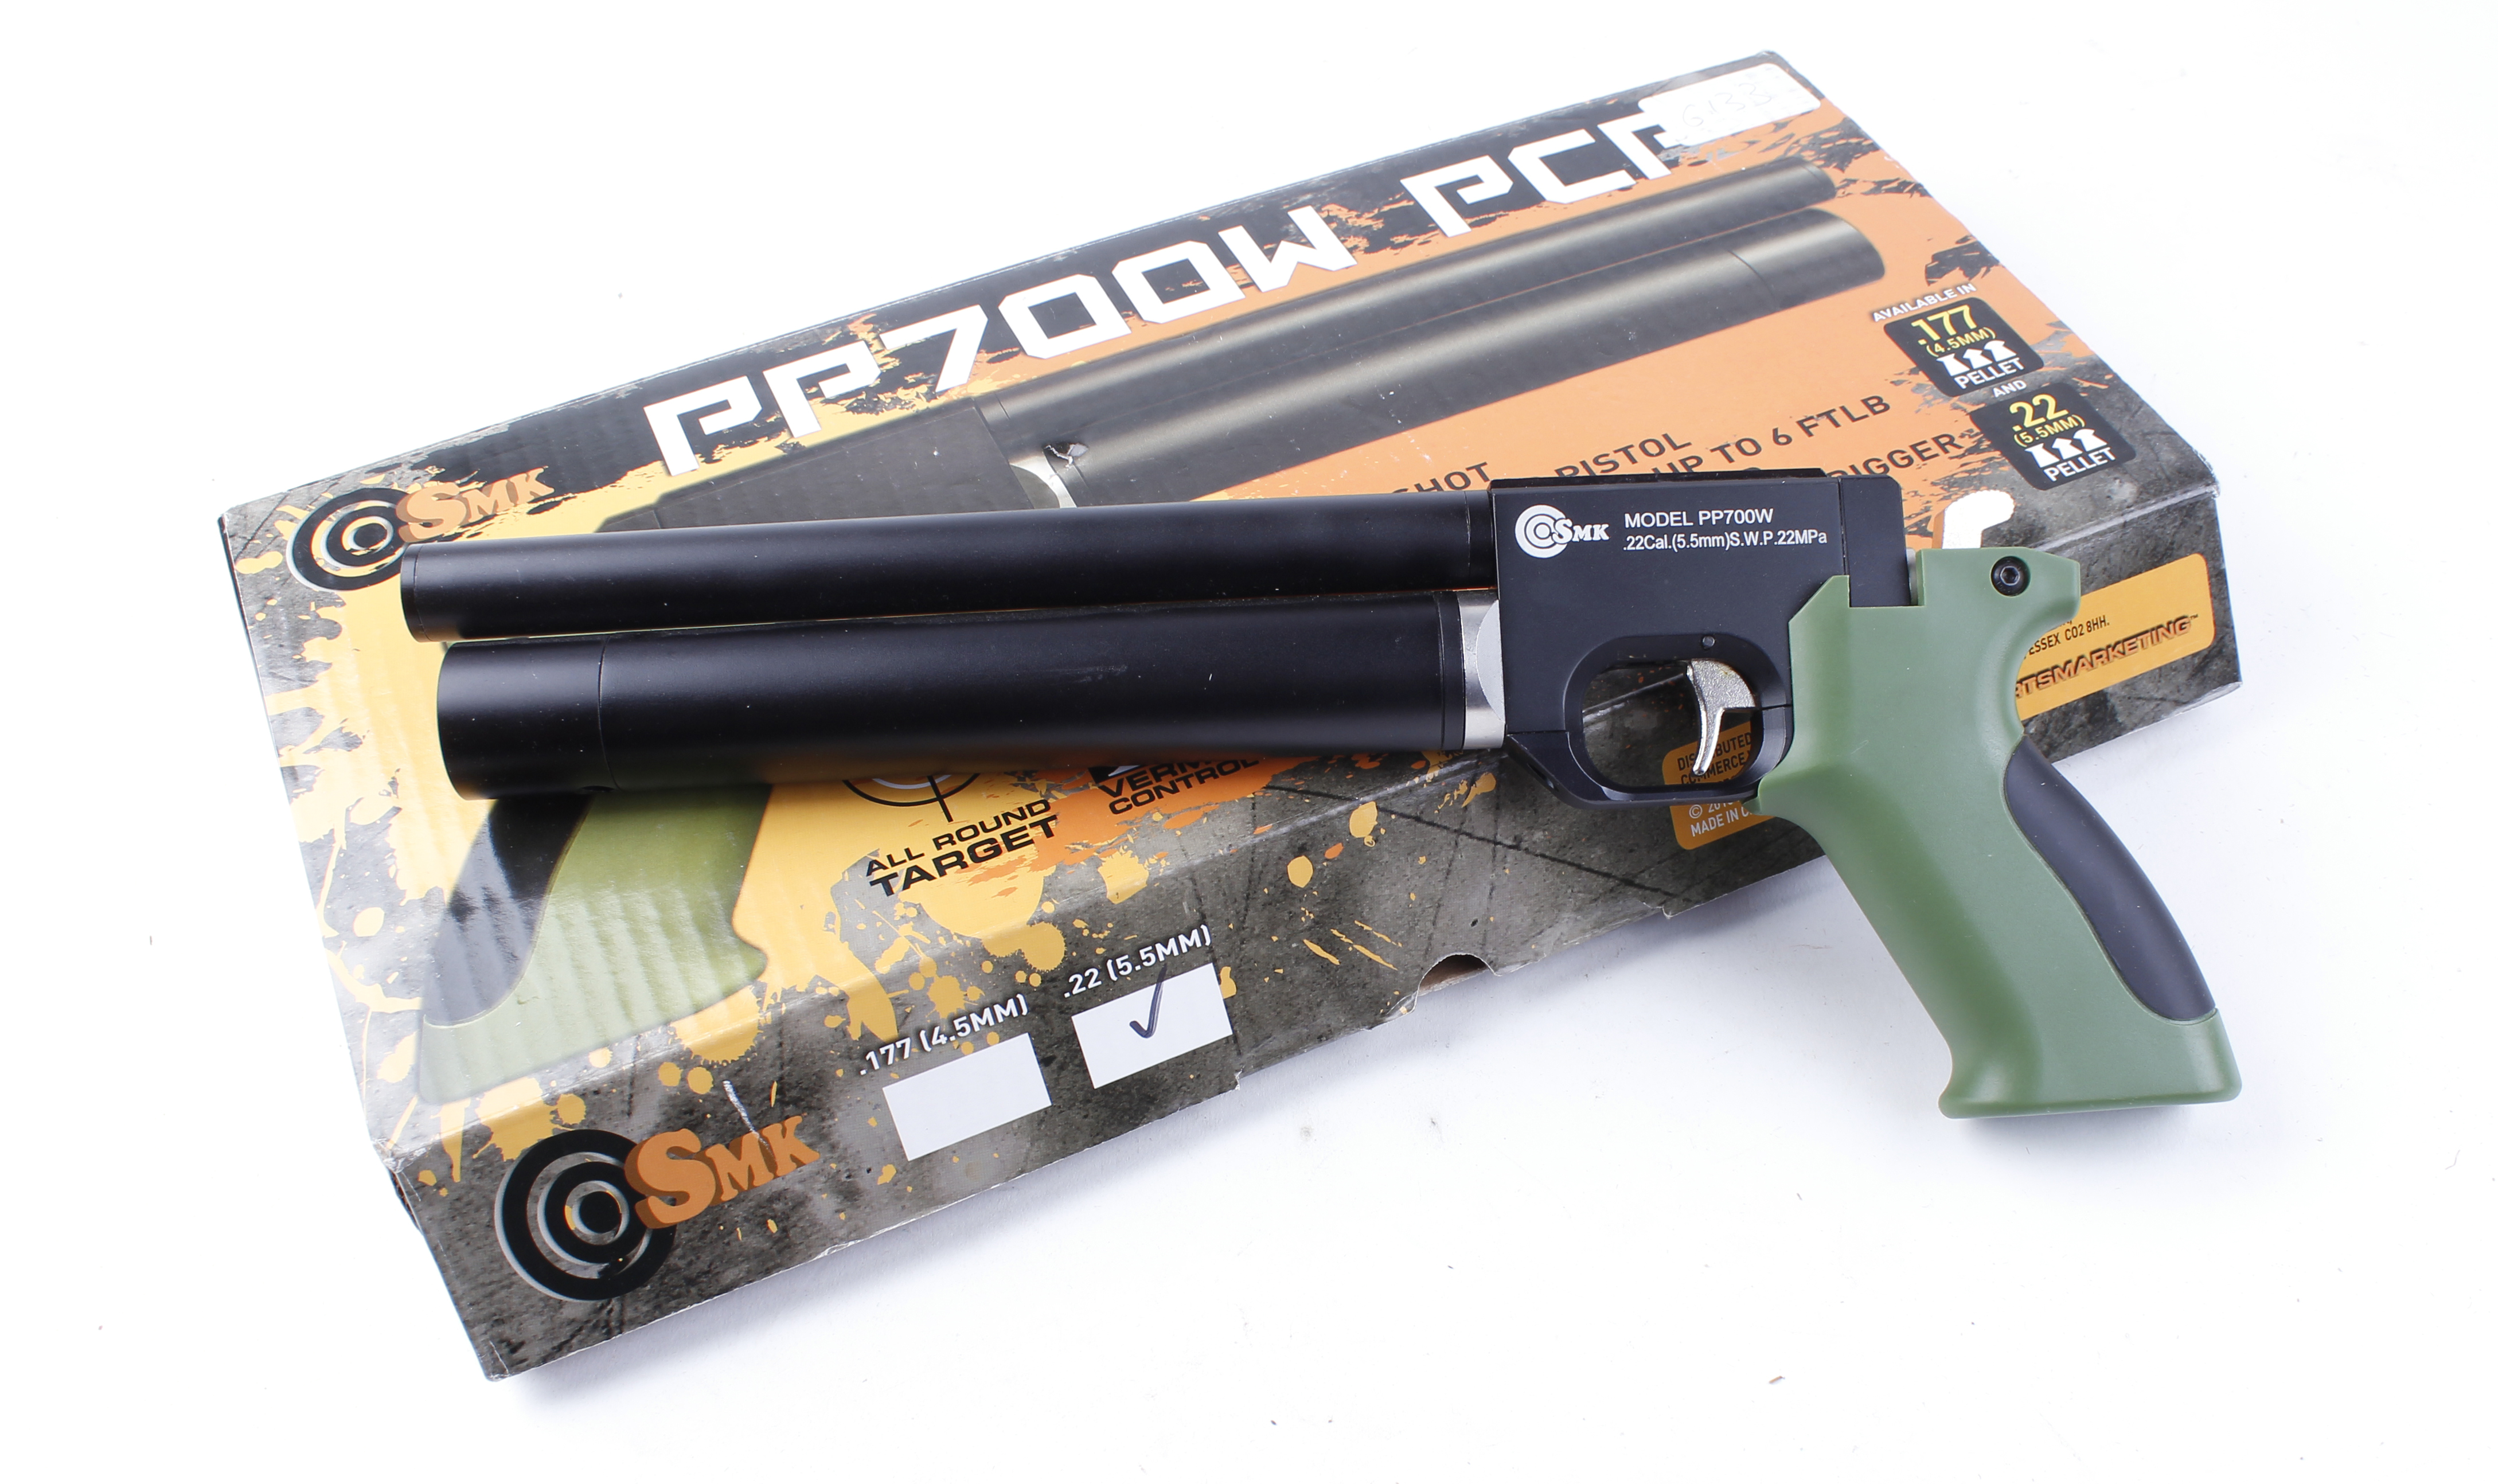 .22 SMK PP700W PCP air pistol, green plastic grips, boxed